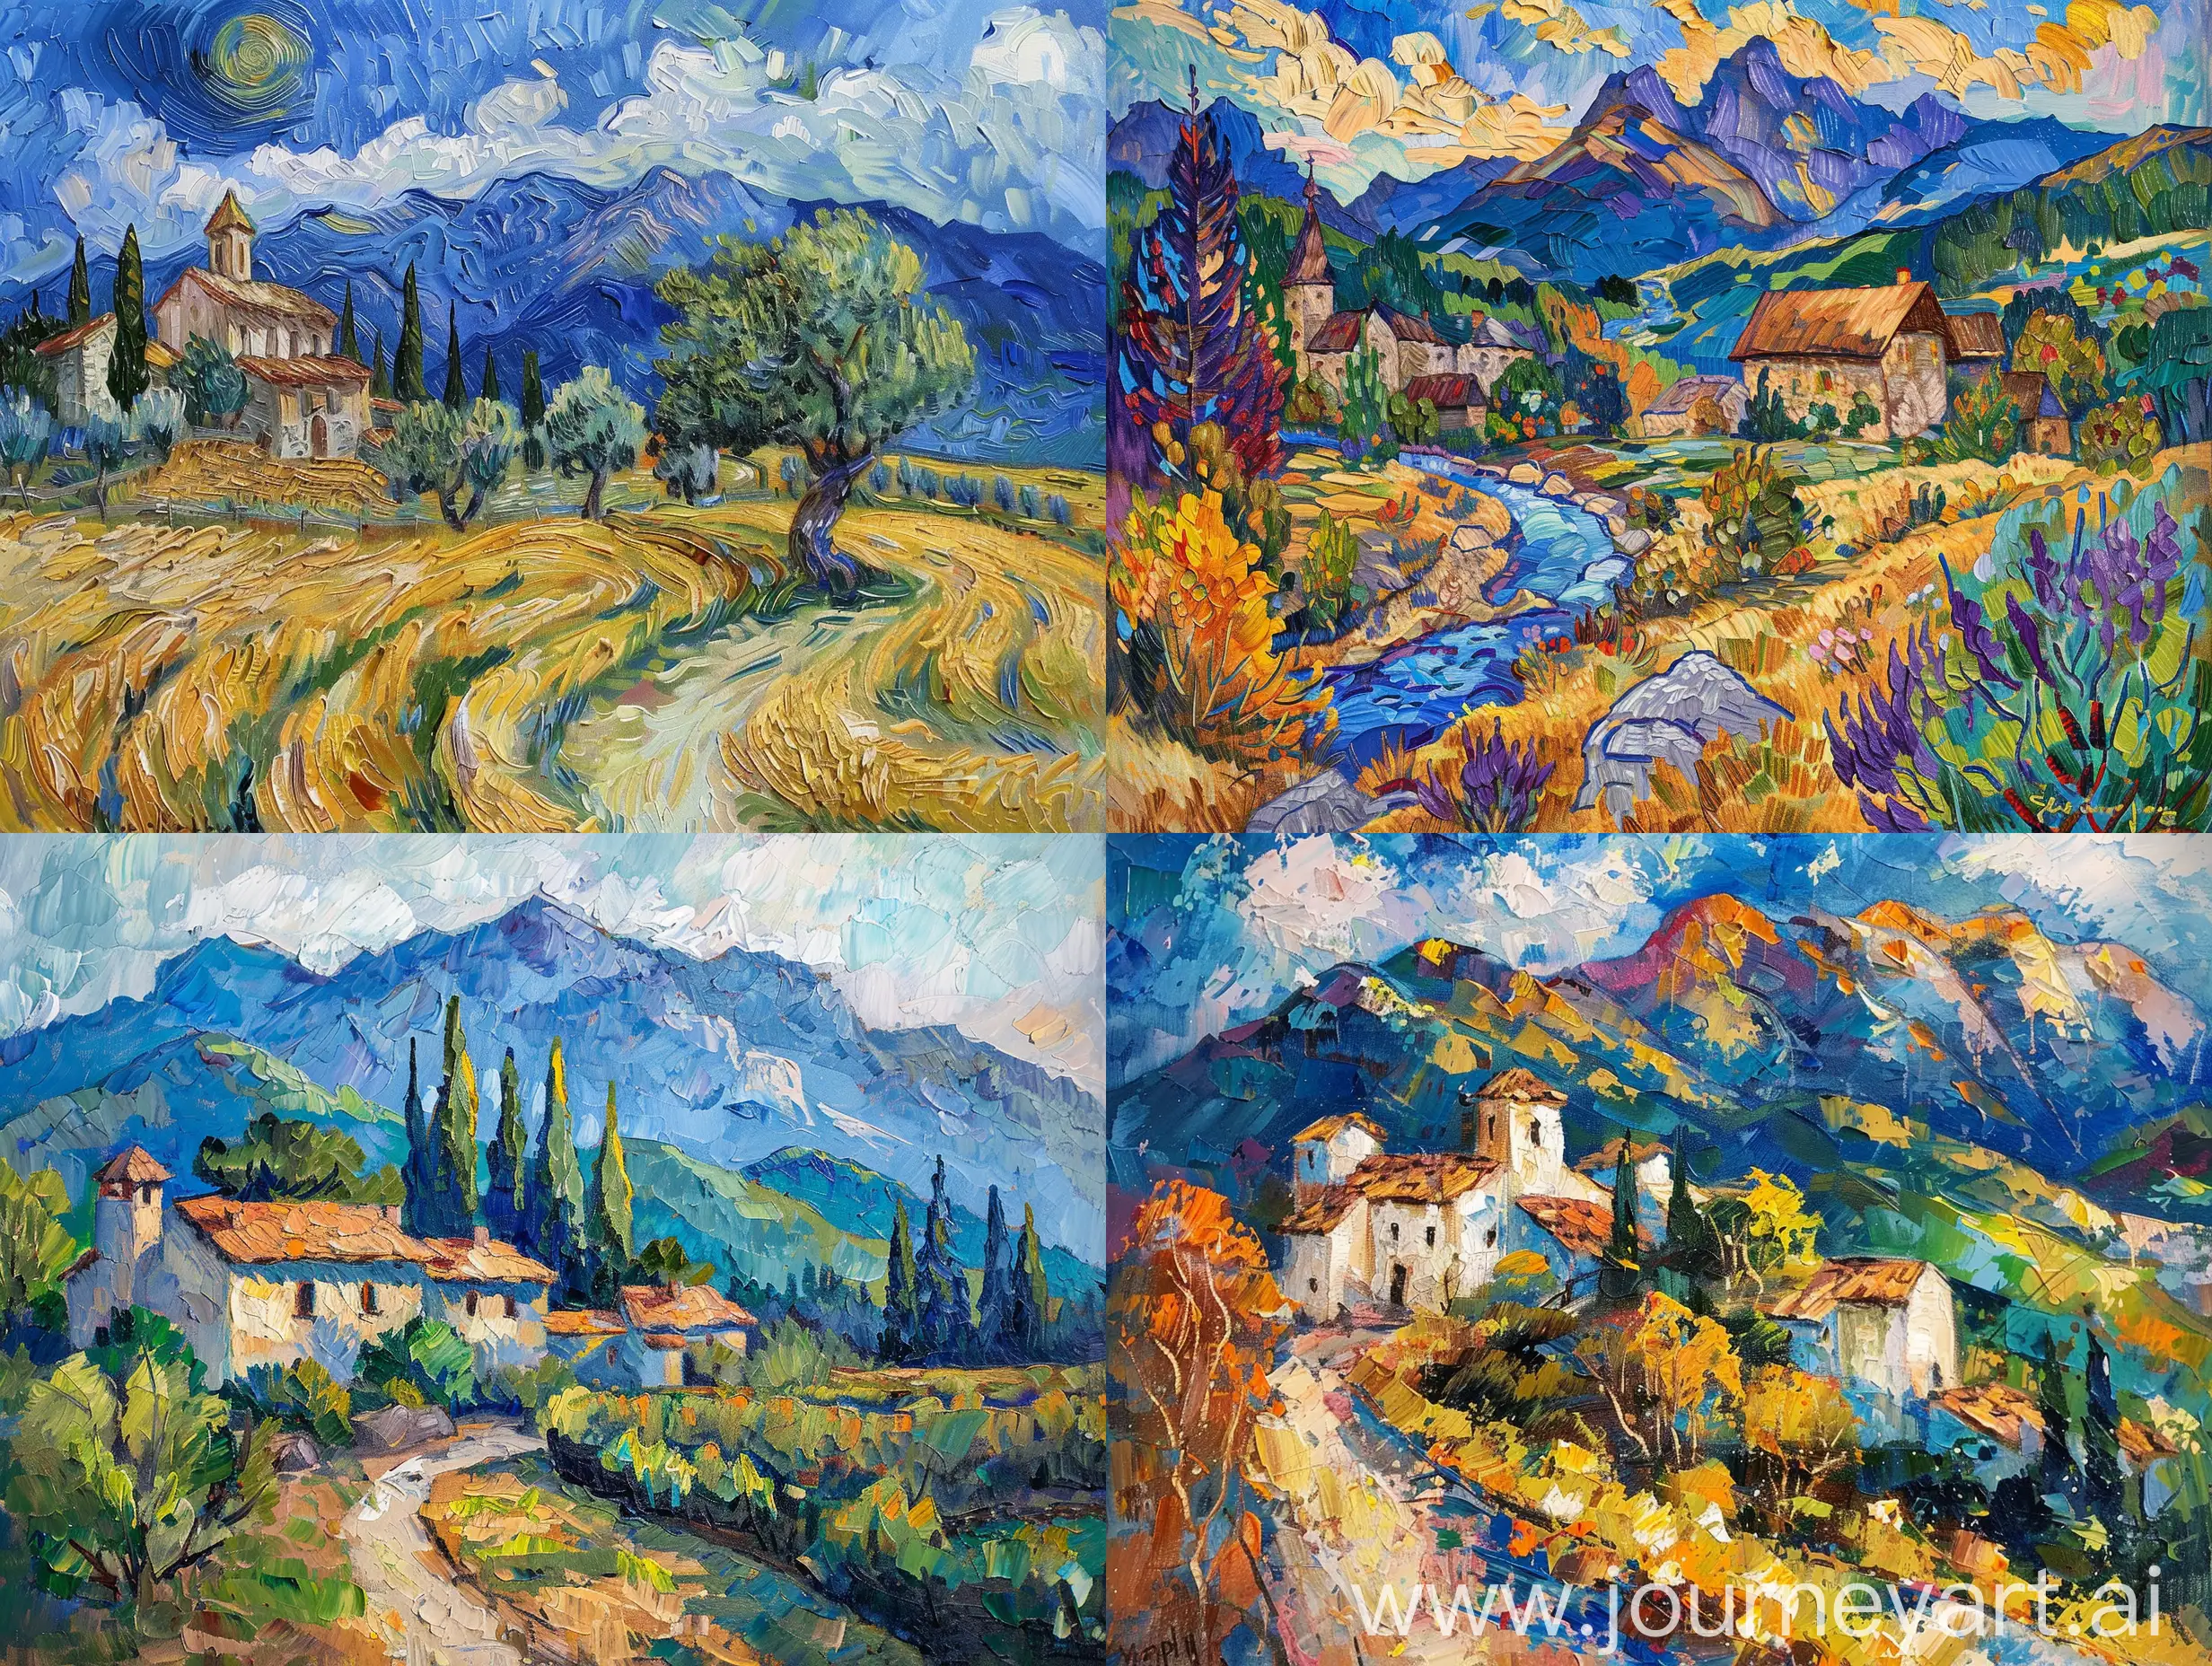 Village-Landscape-by-the-Mountains-in-Van-Gogh-Style